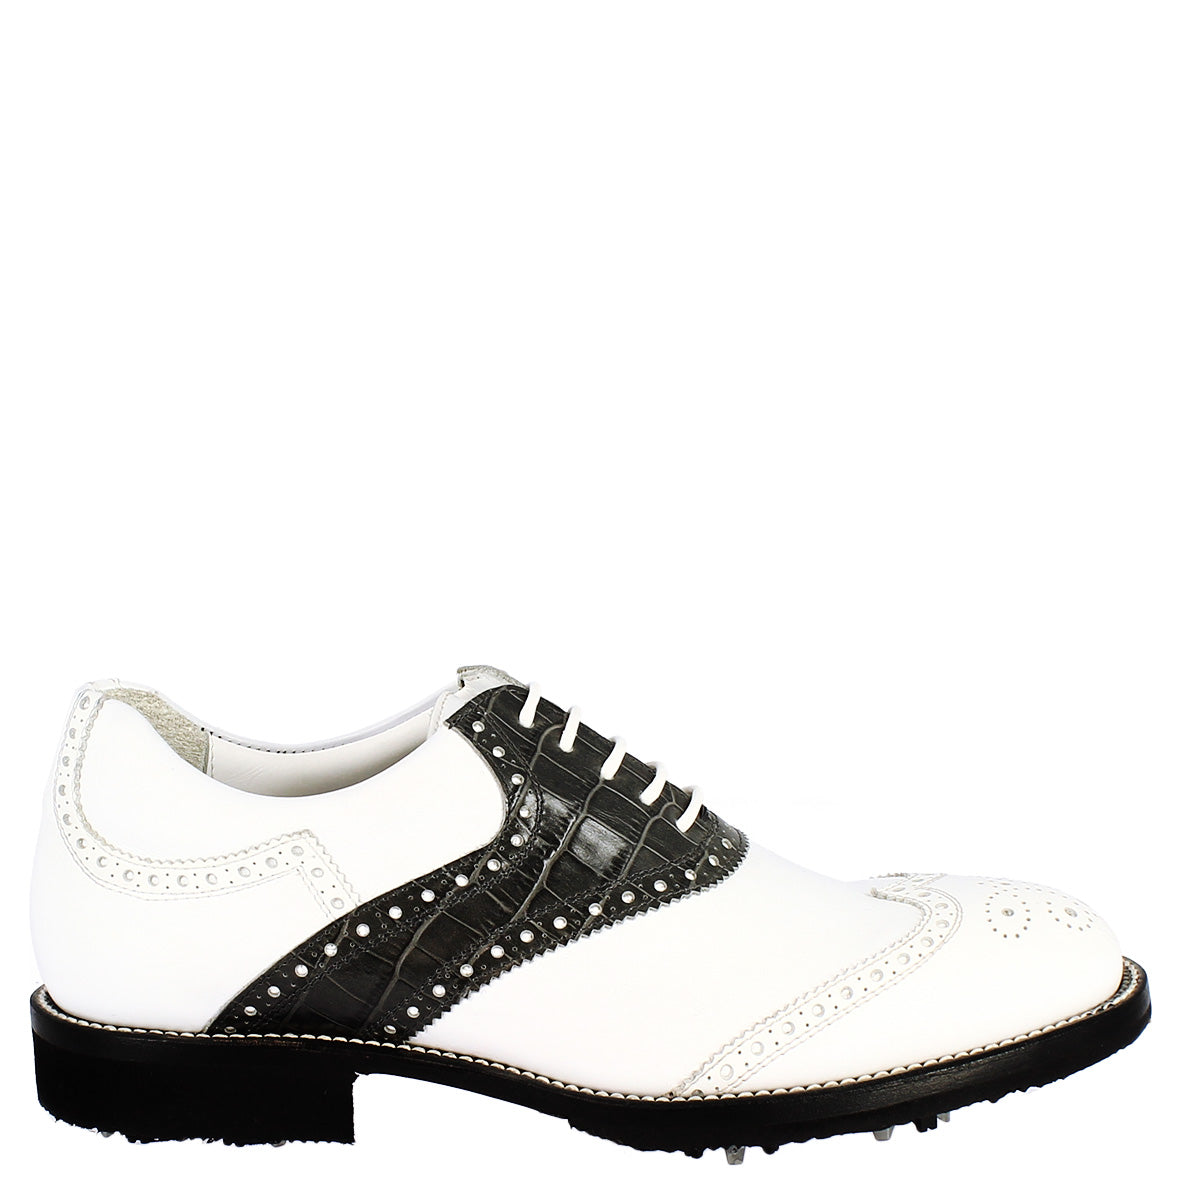 Handcrafted women's golf shoes in black white full-grain leather